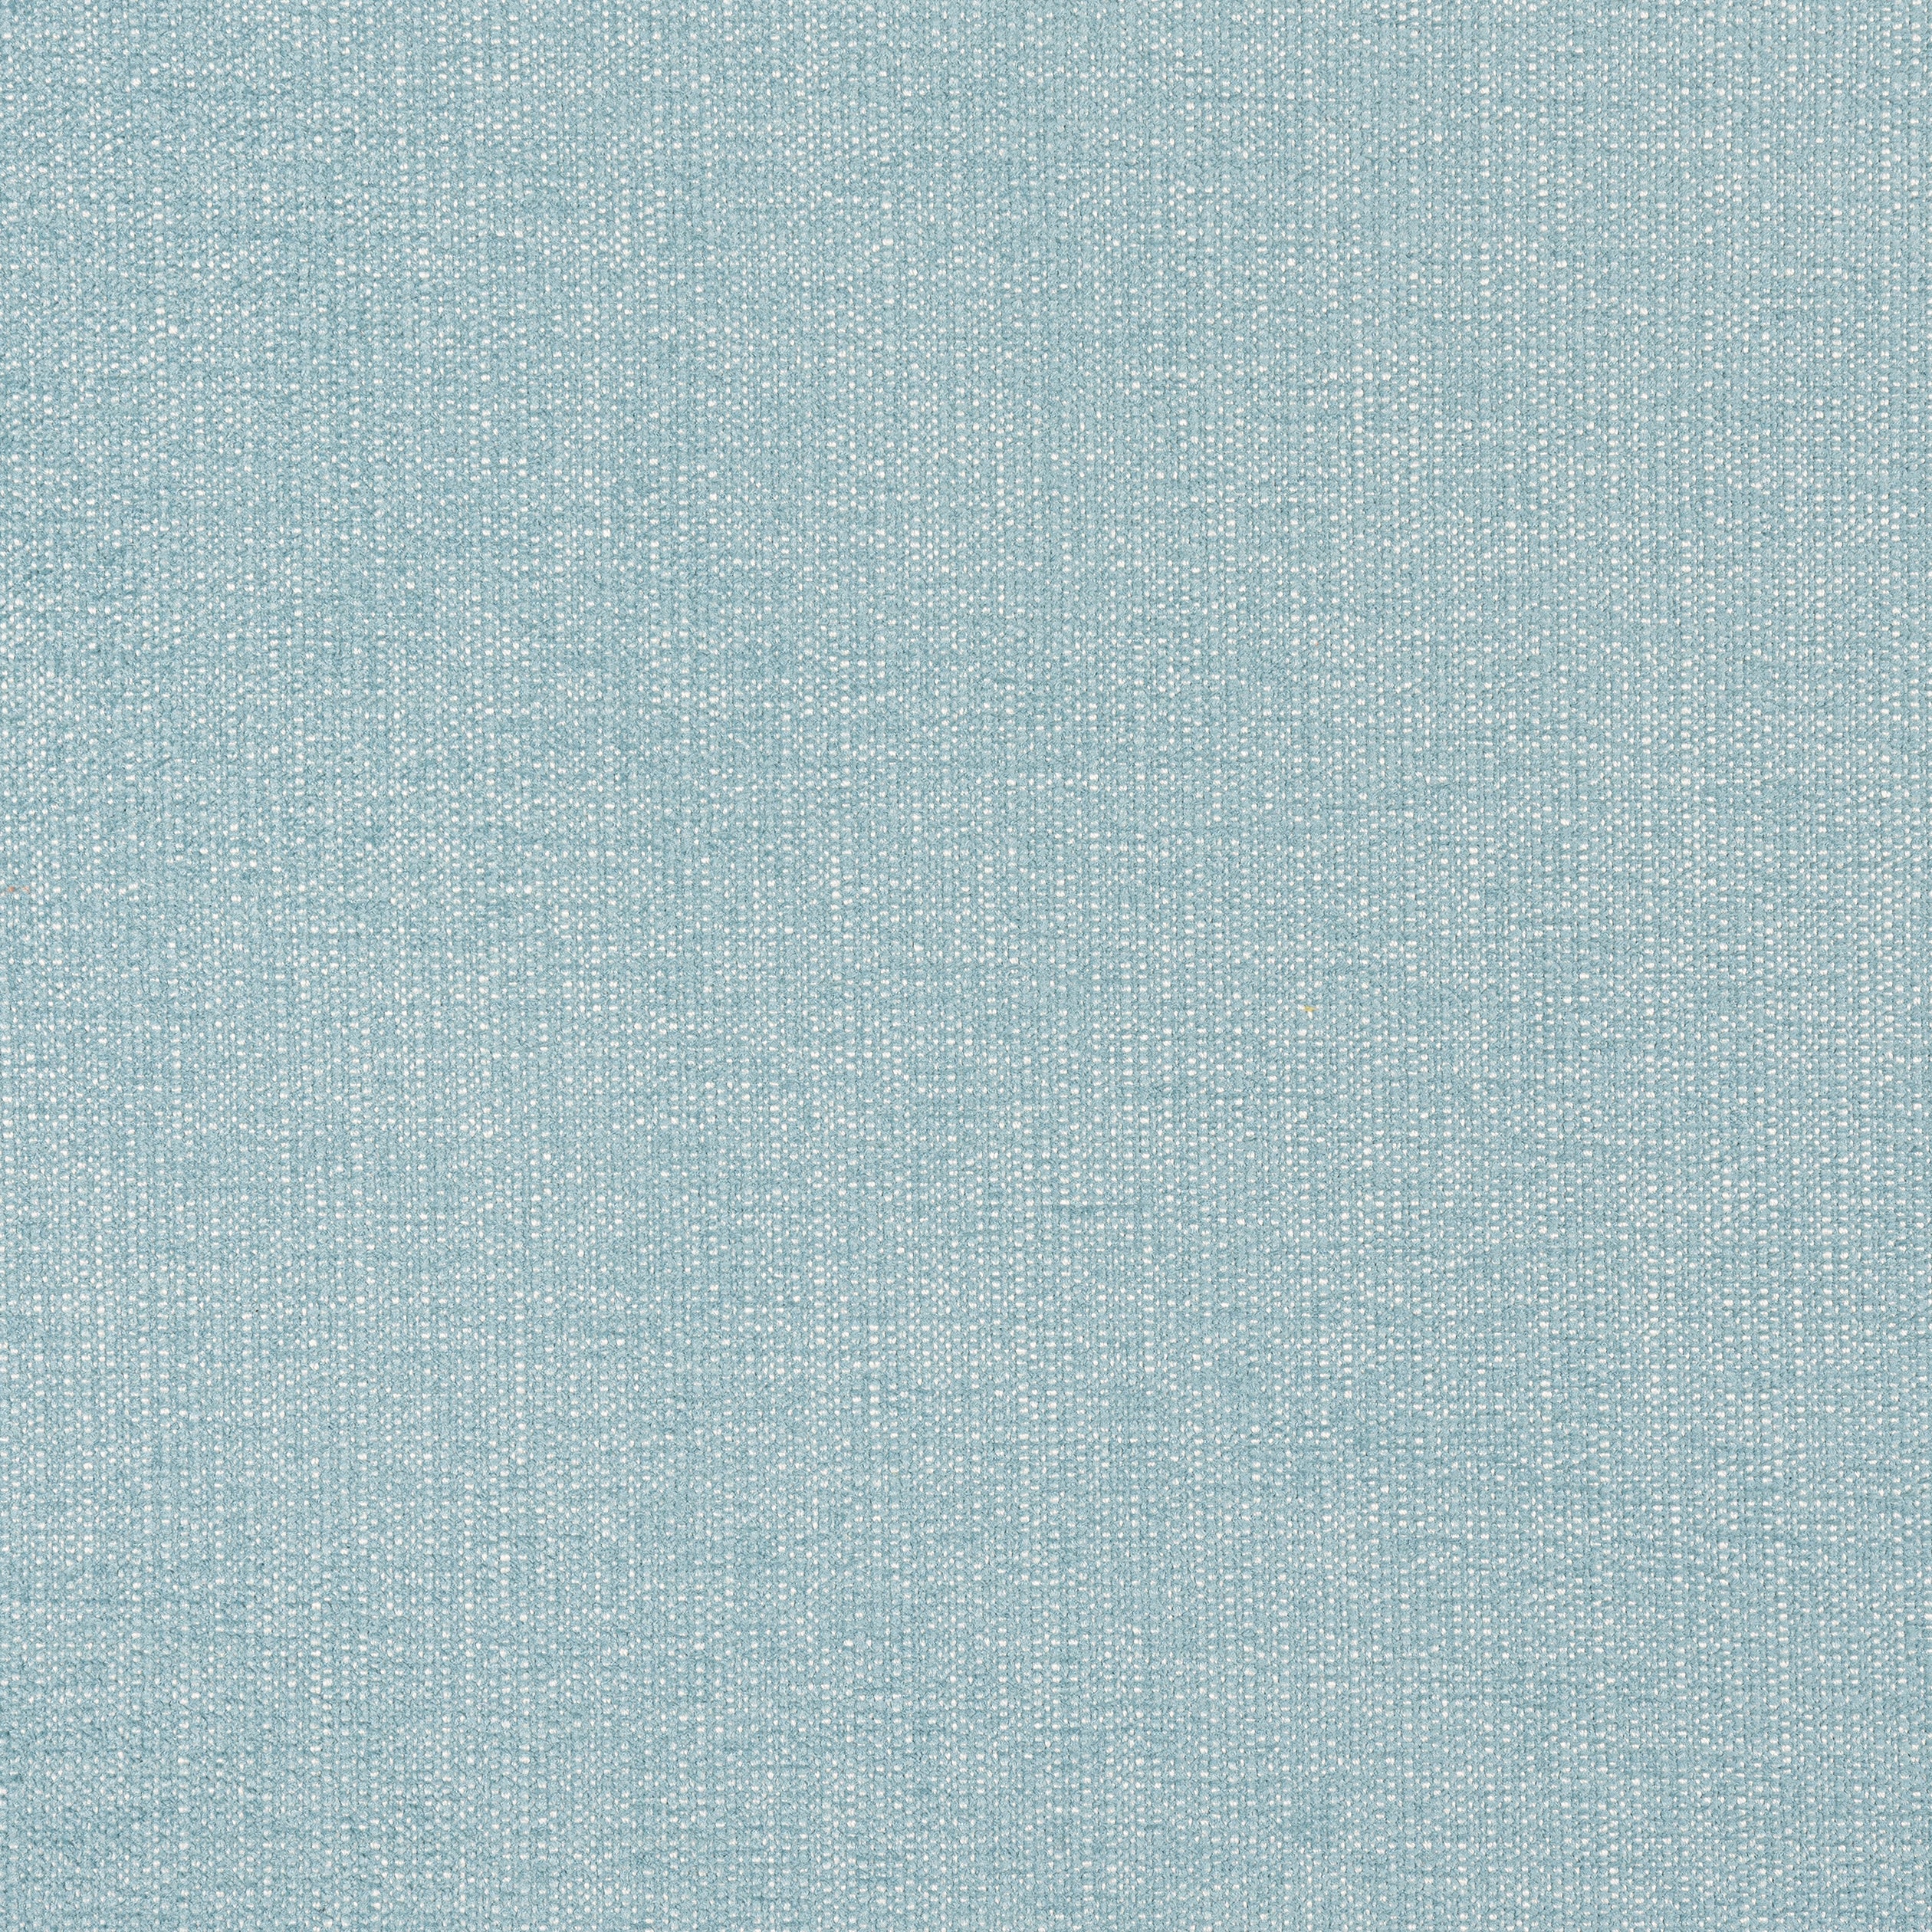 Veda fabric in seaglass color - pattern number W8720 - by Thibaut in the Haven Textures collection